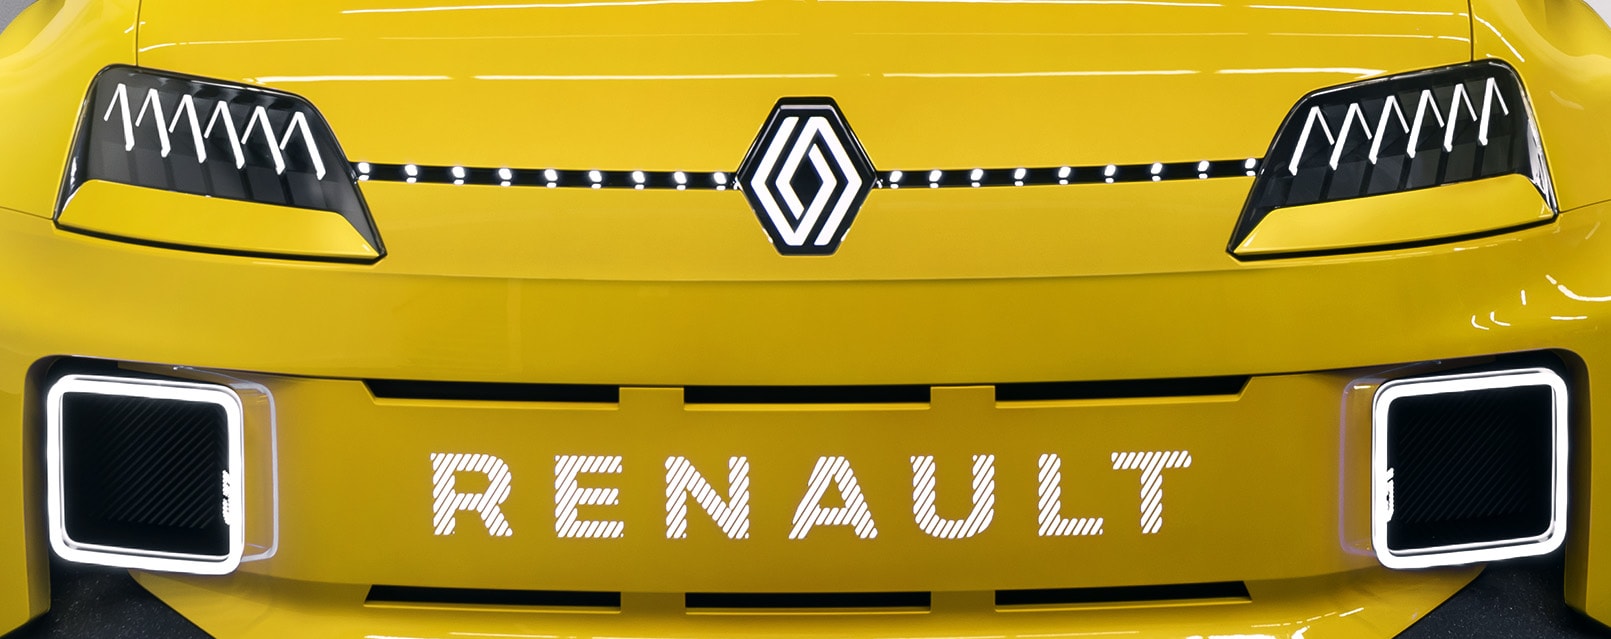 Renault Quietly Adopts New Logo First Seen on the 5 EV Prototype -  autoevolution